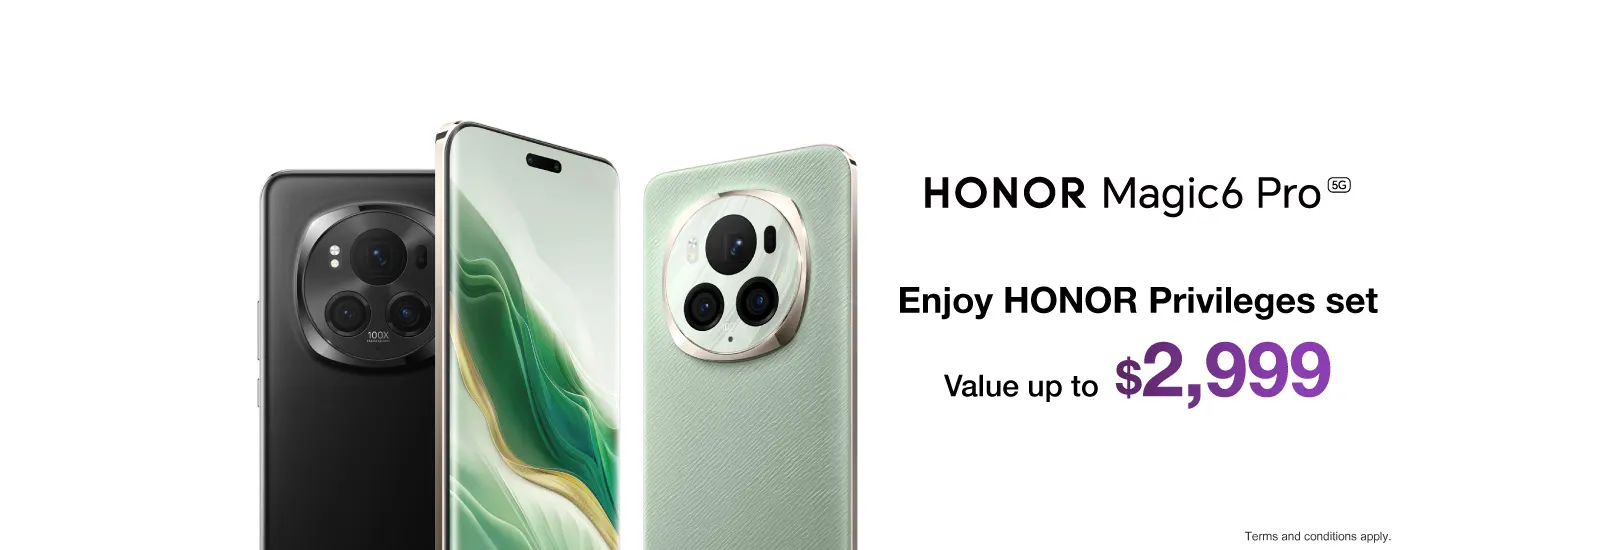 HONOR Magic6 Pro 5G Specifications